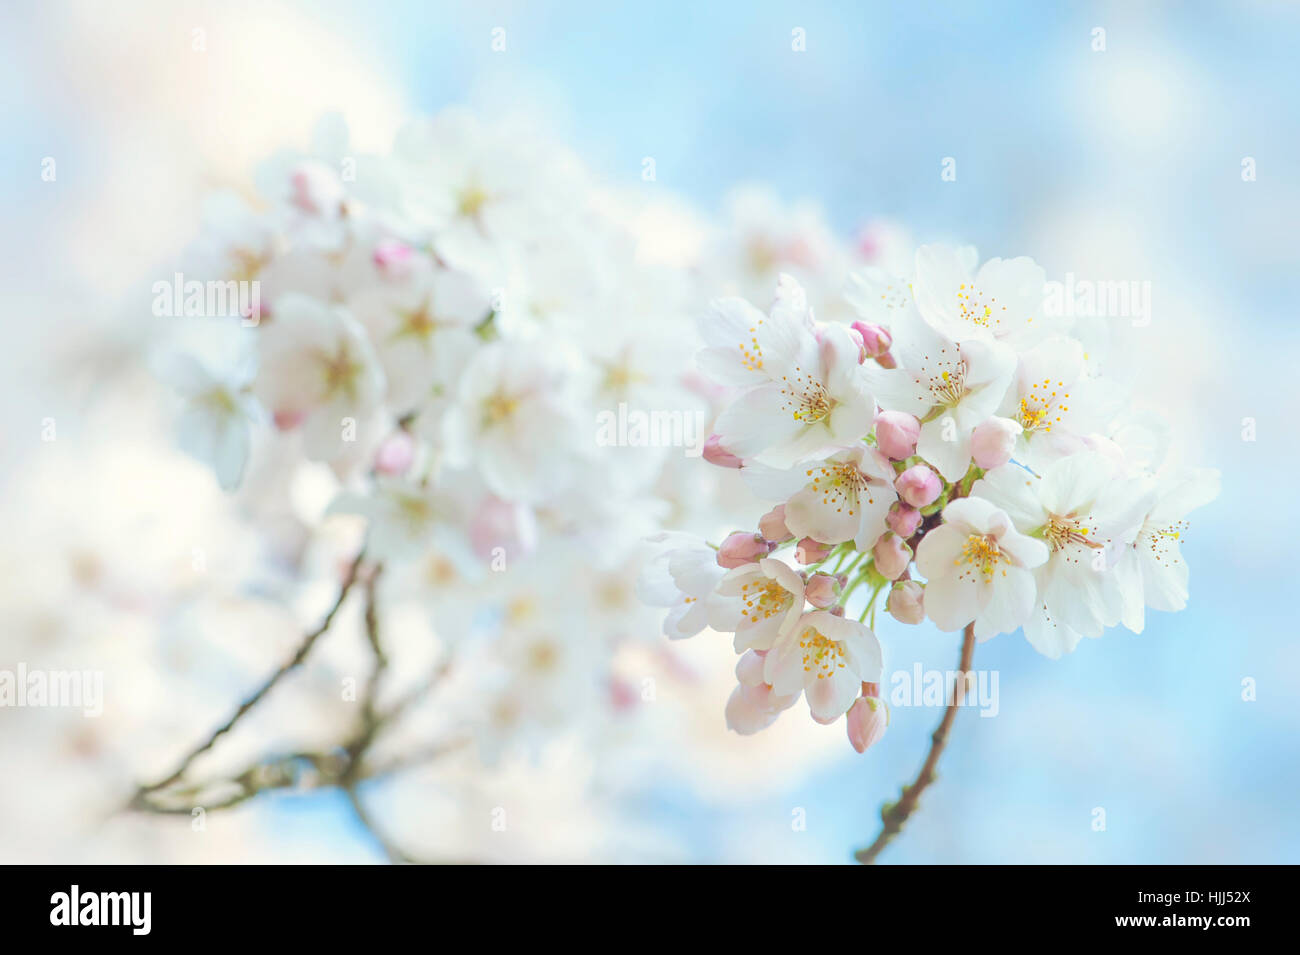 Close-up image of the delicate white spring Sakura blossom of the Yoshino Cherry tree, images taken against a blue sky. Stock Photo